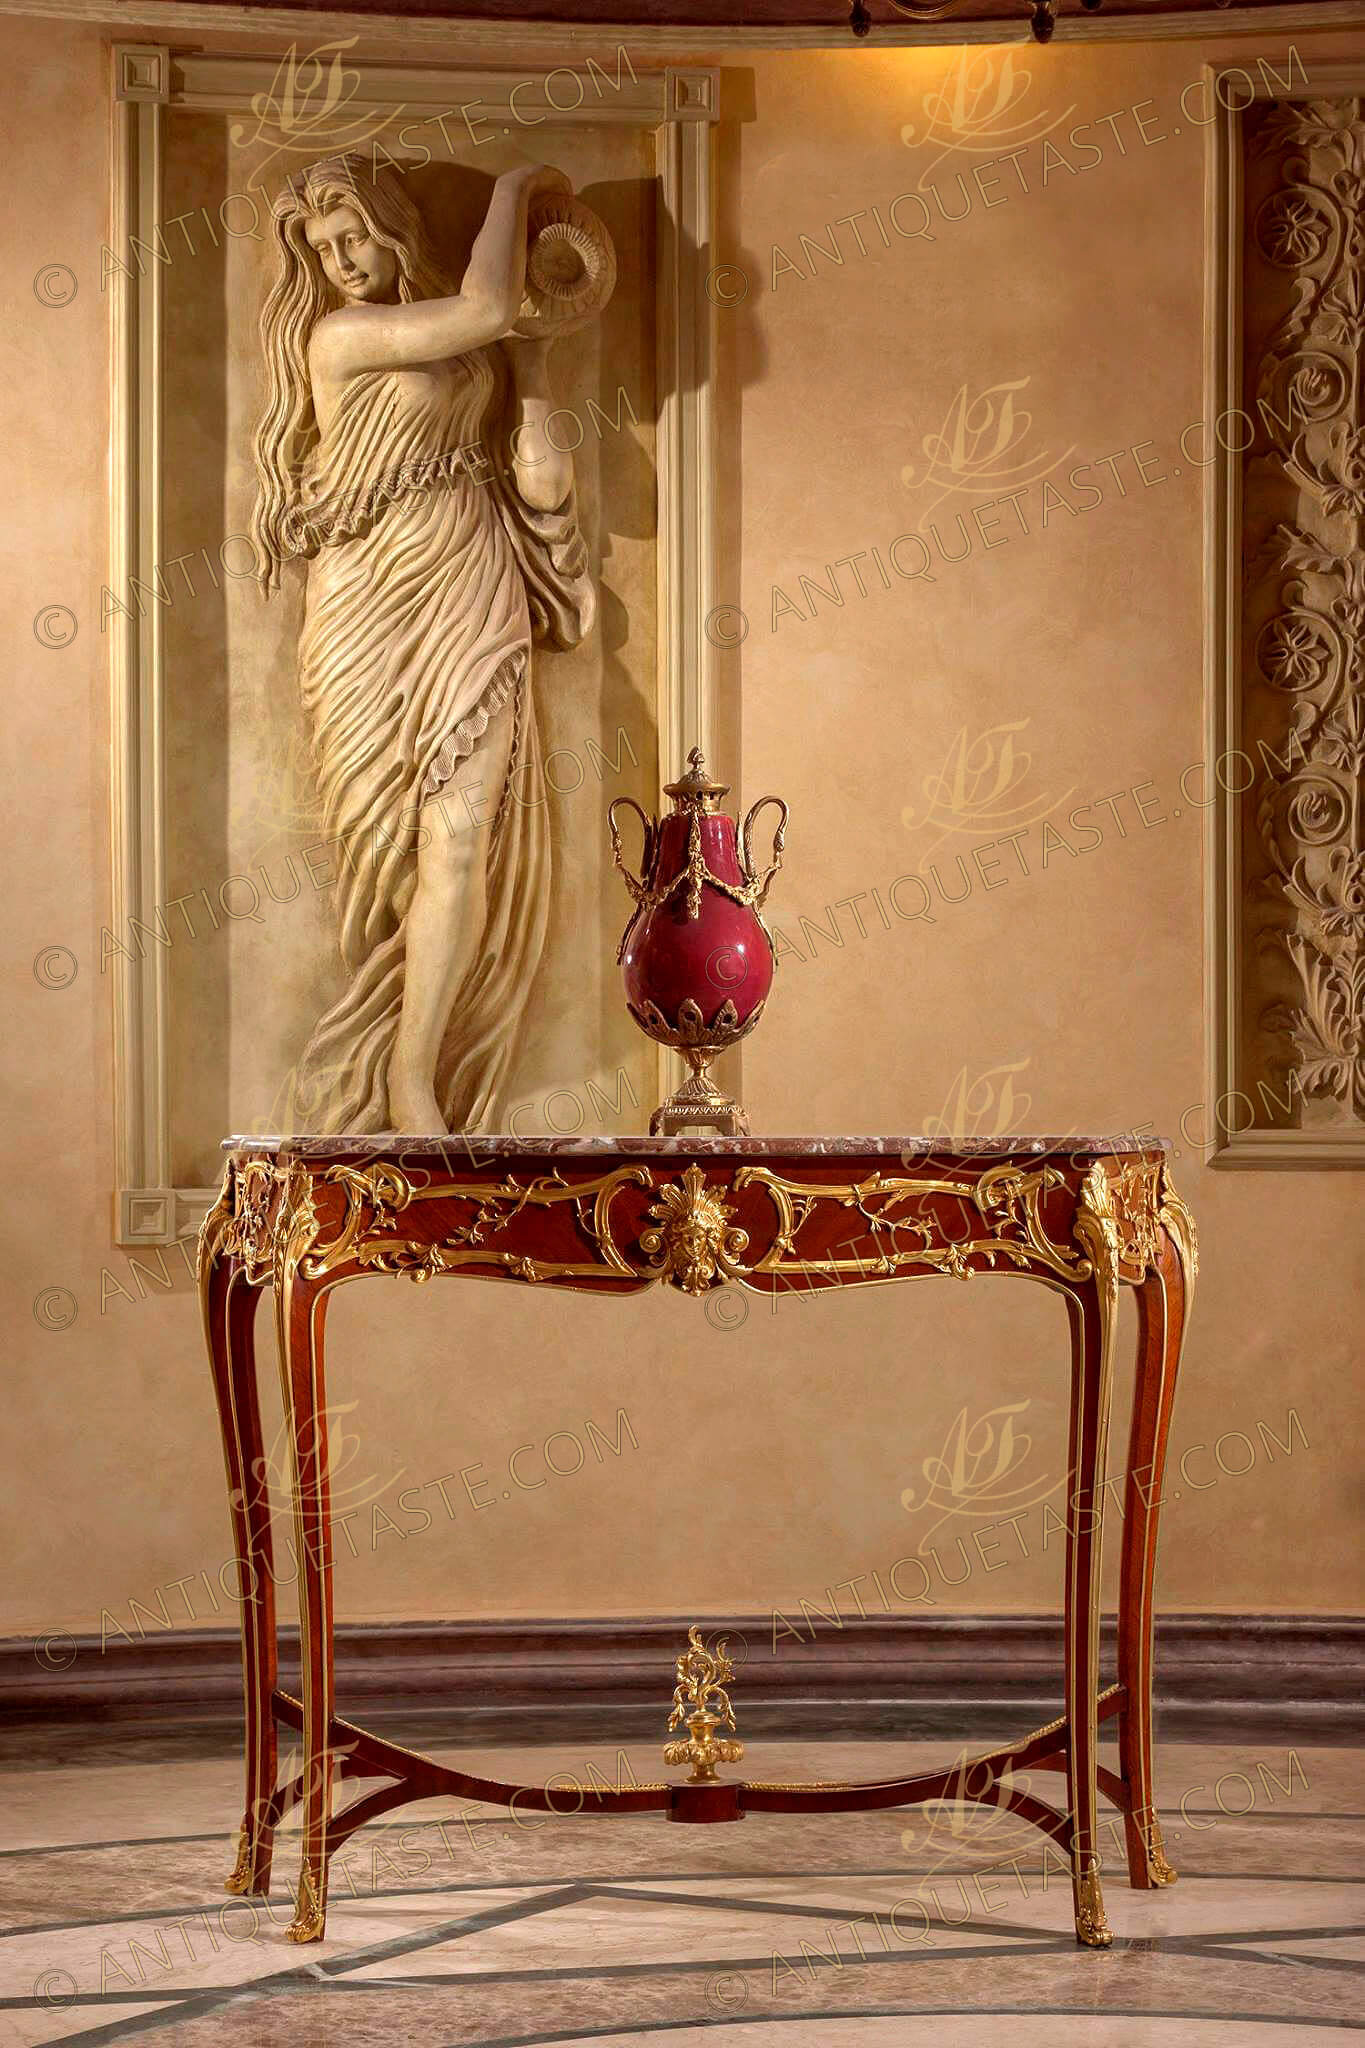 A prodigious French 19th Century Belle Époque Louis XV Rococo style gilt-ormolu-mounted freestanding Console Table after the model by François Linke, The beveled marble top of serpentine outline above an undulating frieze centered by a finely chased ormolu  female mask with acanthus leaves headdress and foliage volutes within C-scroll and leafy encadrements repeated on the sides; Raised on angular cabriole legs surmounted by large acanthus leaves chutes, bordered with ormolu trim and ending in foliate scroll sabots, joined by an ormolu mounted inverted curved double X stretcher centered by a platform surmounted by a finial of an urn of prosperity surmounted by scrolling leaves, The original console table, with a mandolin player centering the stretcher and rococo acanthus mounts, although designed in the Louis XV style, is not fully developed in combining this style with the Art Nouveau style for which François Linke is renowned. Linke drew his inspiration from the extravagant Rococo creations of François de Cuvilliés (1695-1968) that can be seen in the engravings of Johann Michael Hoppenhaut in the 1750's